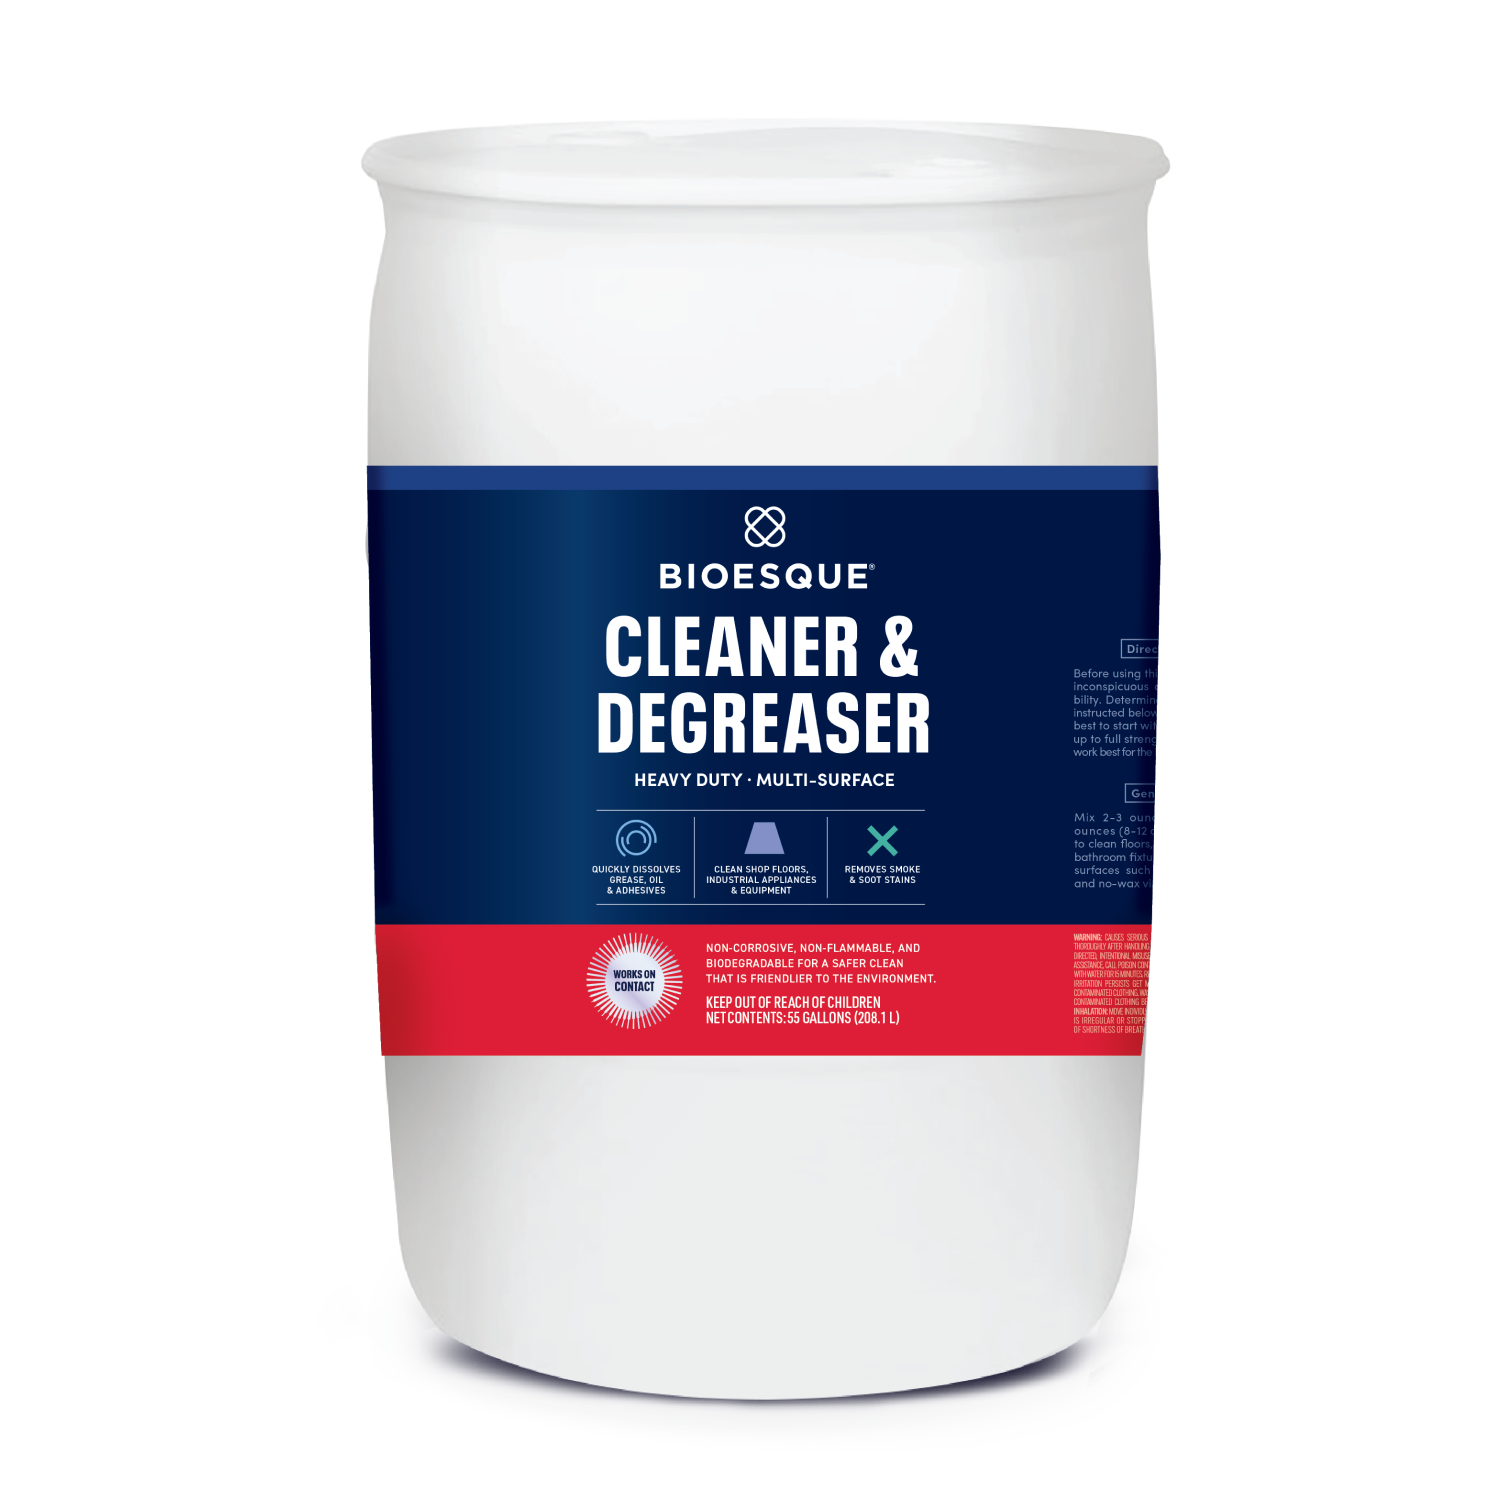 Bioesque Heavy Duty Cleaner & Degreaser (55 Gal)